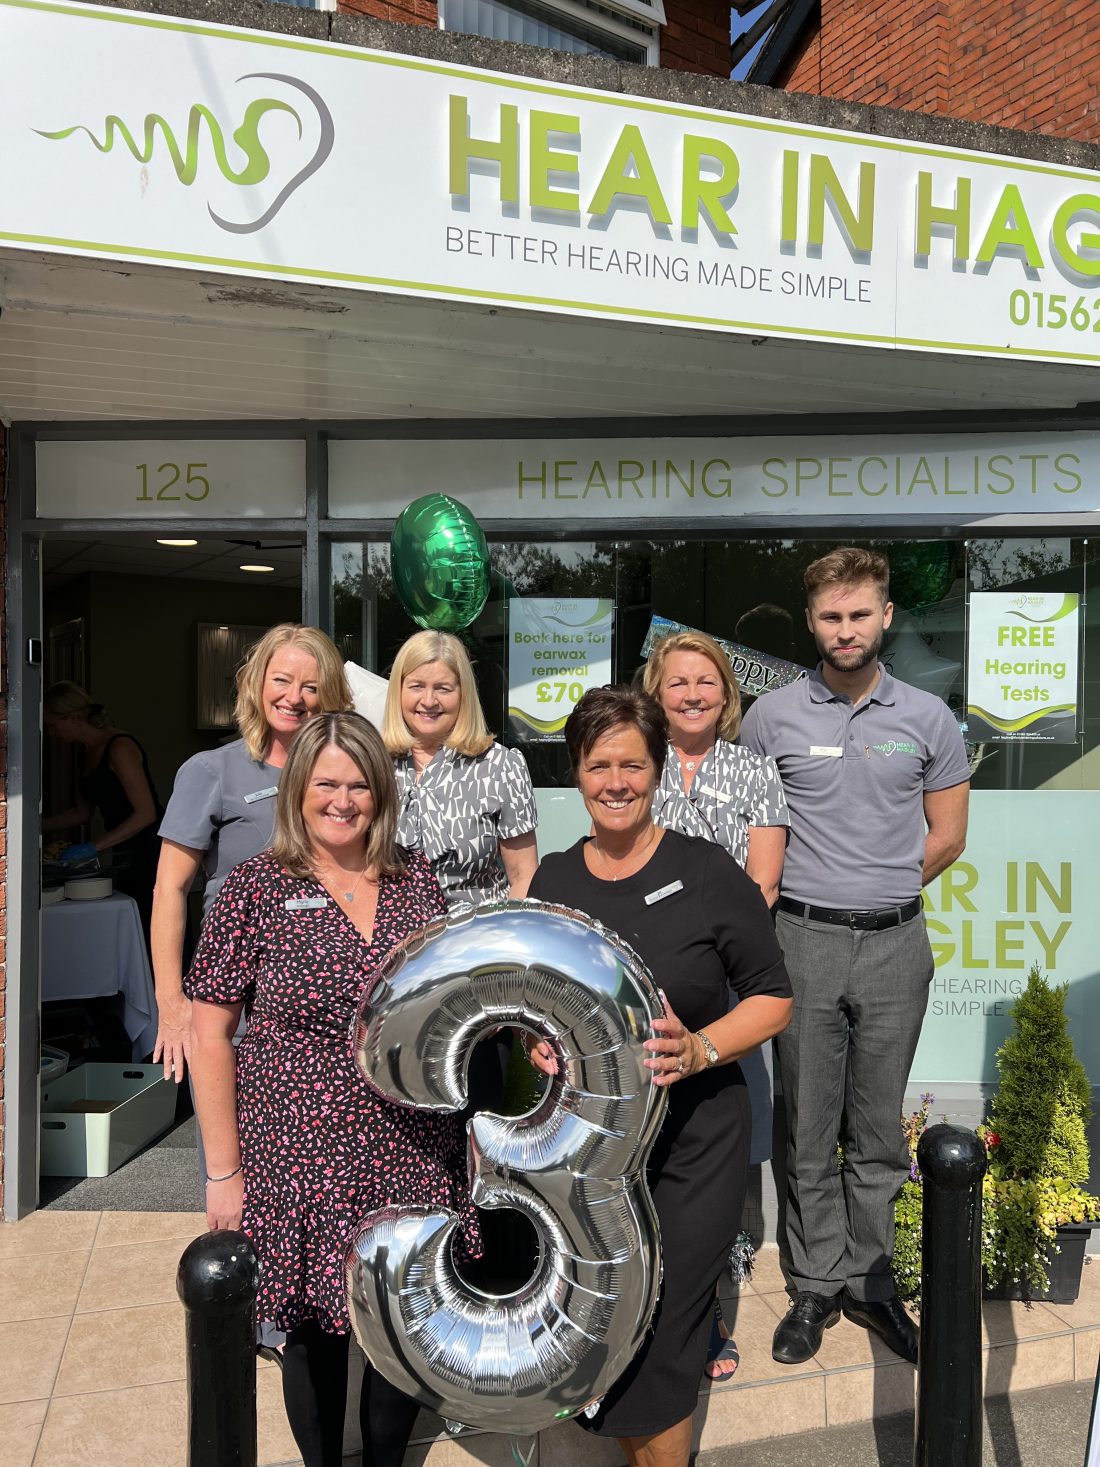 We had a great Open Day celebrating our 3rd anniversary